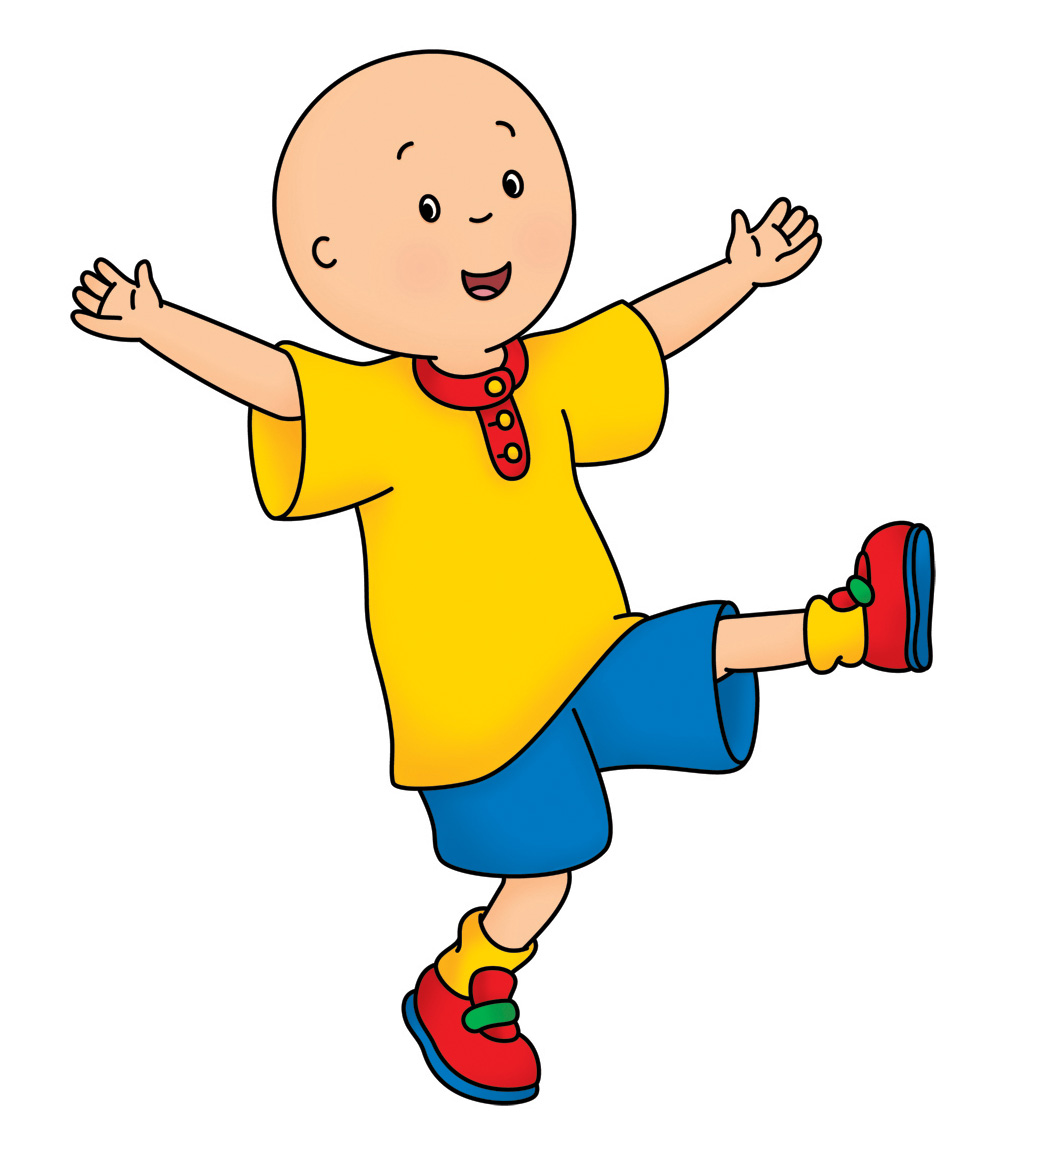 Caillou-xl-pictures-12.jpg